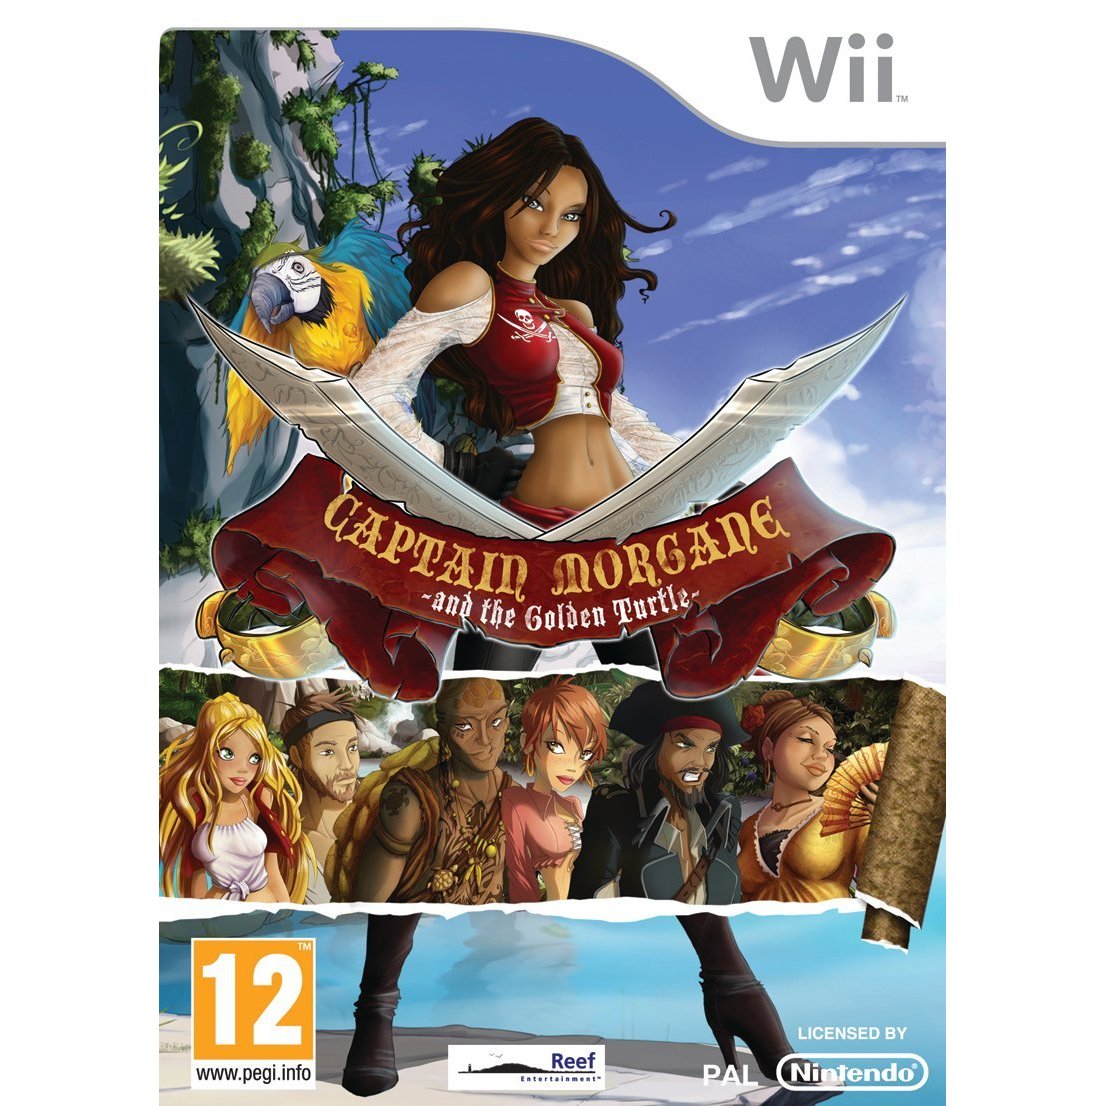 NINTENDO Captain Morgane and the Golden Turtle Wii